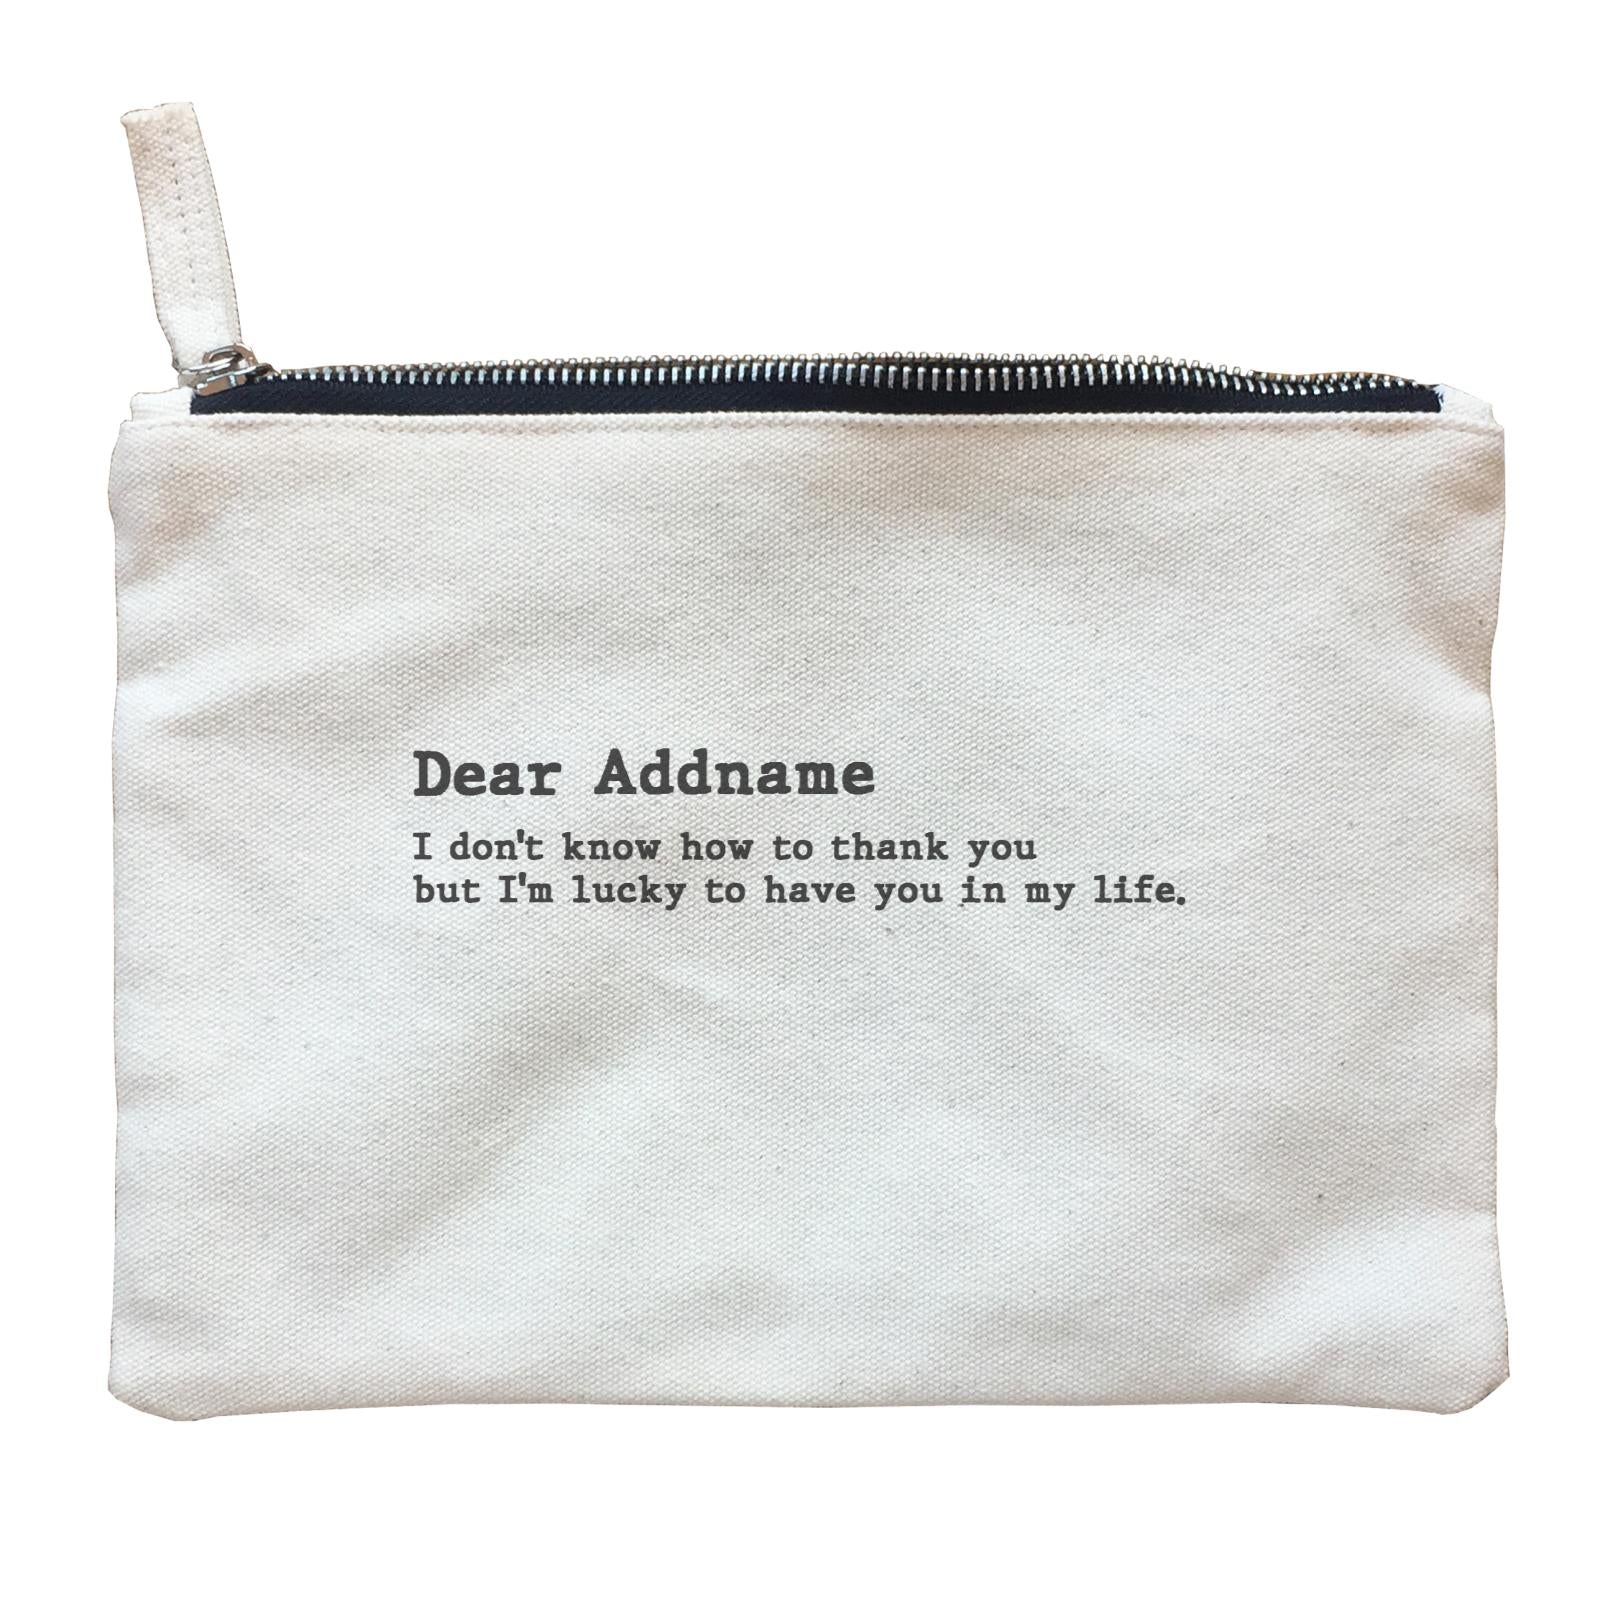 Best Friends Quotes Dear Addname I Don't Know How To Thank You Zipper Pouch